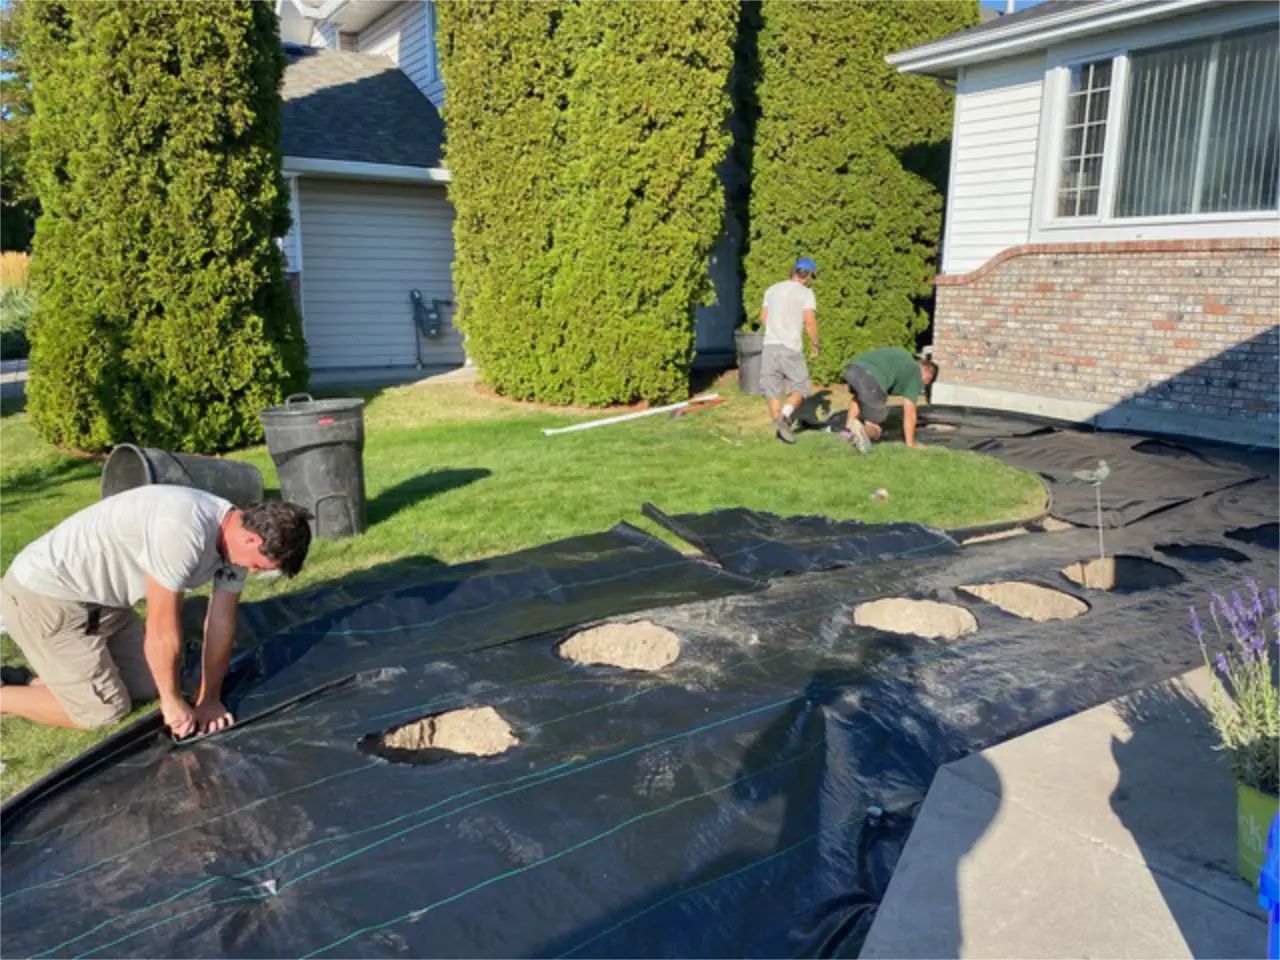 Three people working on landscaping in a residential yard, laying down a black weed barrier fabric with cutouts for plants on a sunny day.